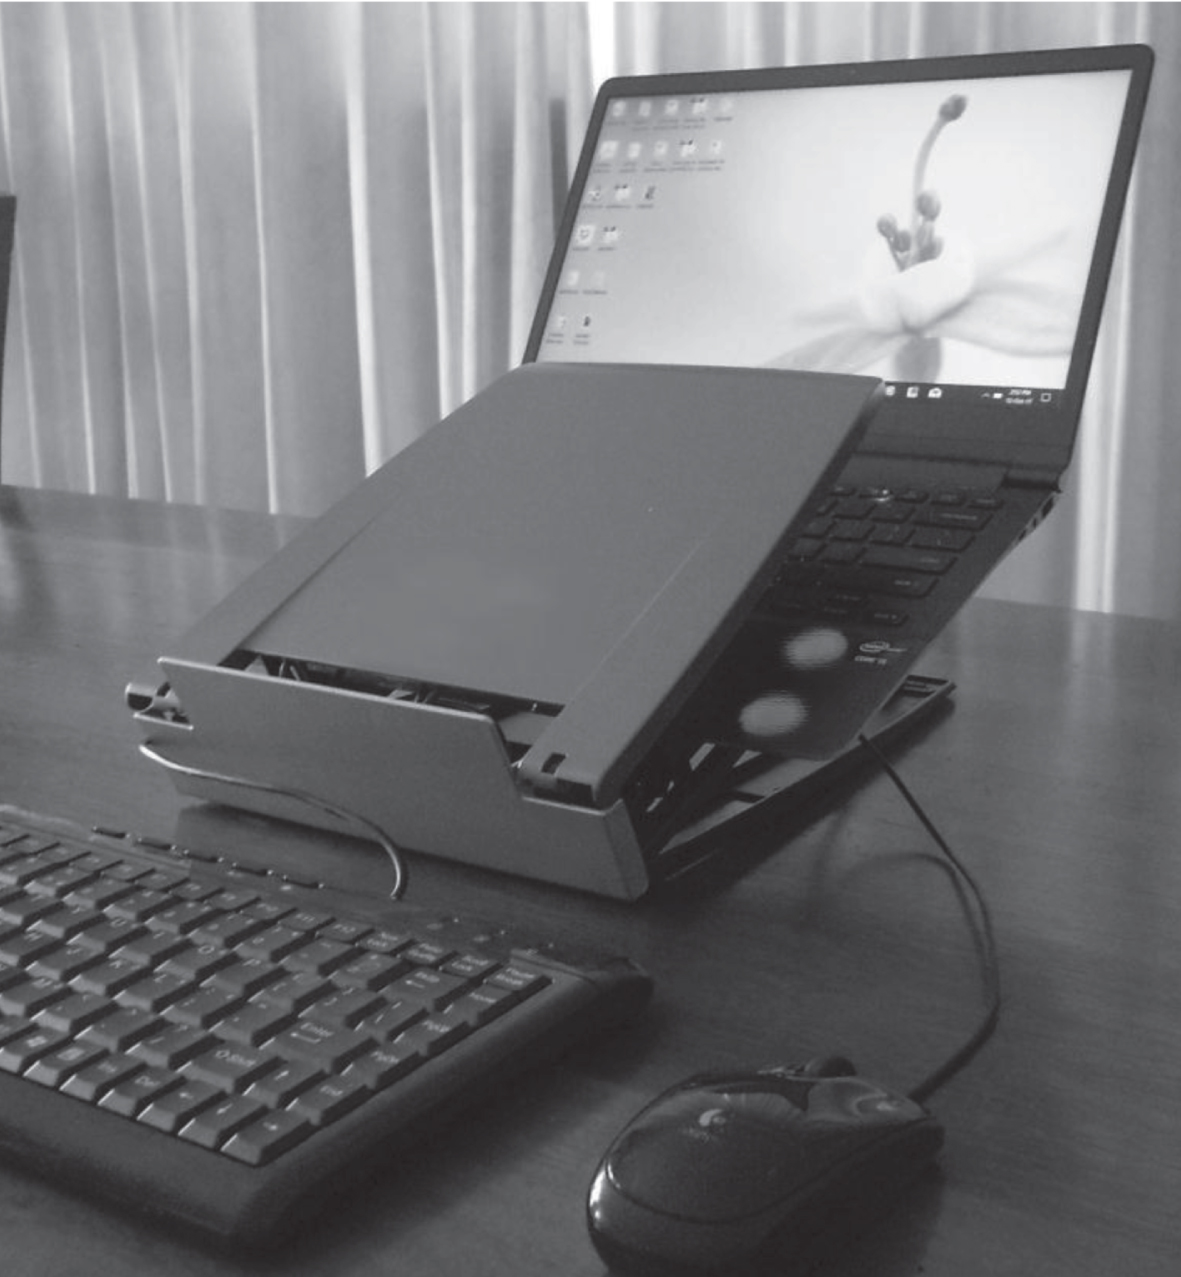 Example of a laptop-station with external mouse and keyboard.